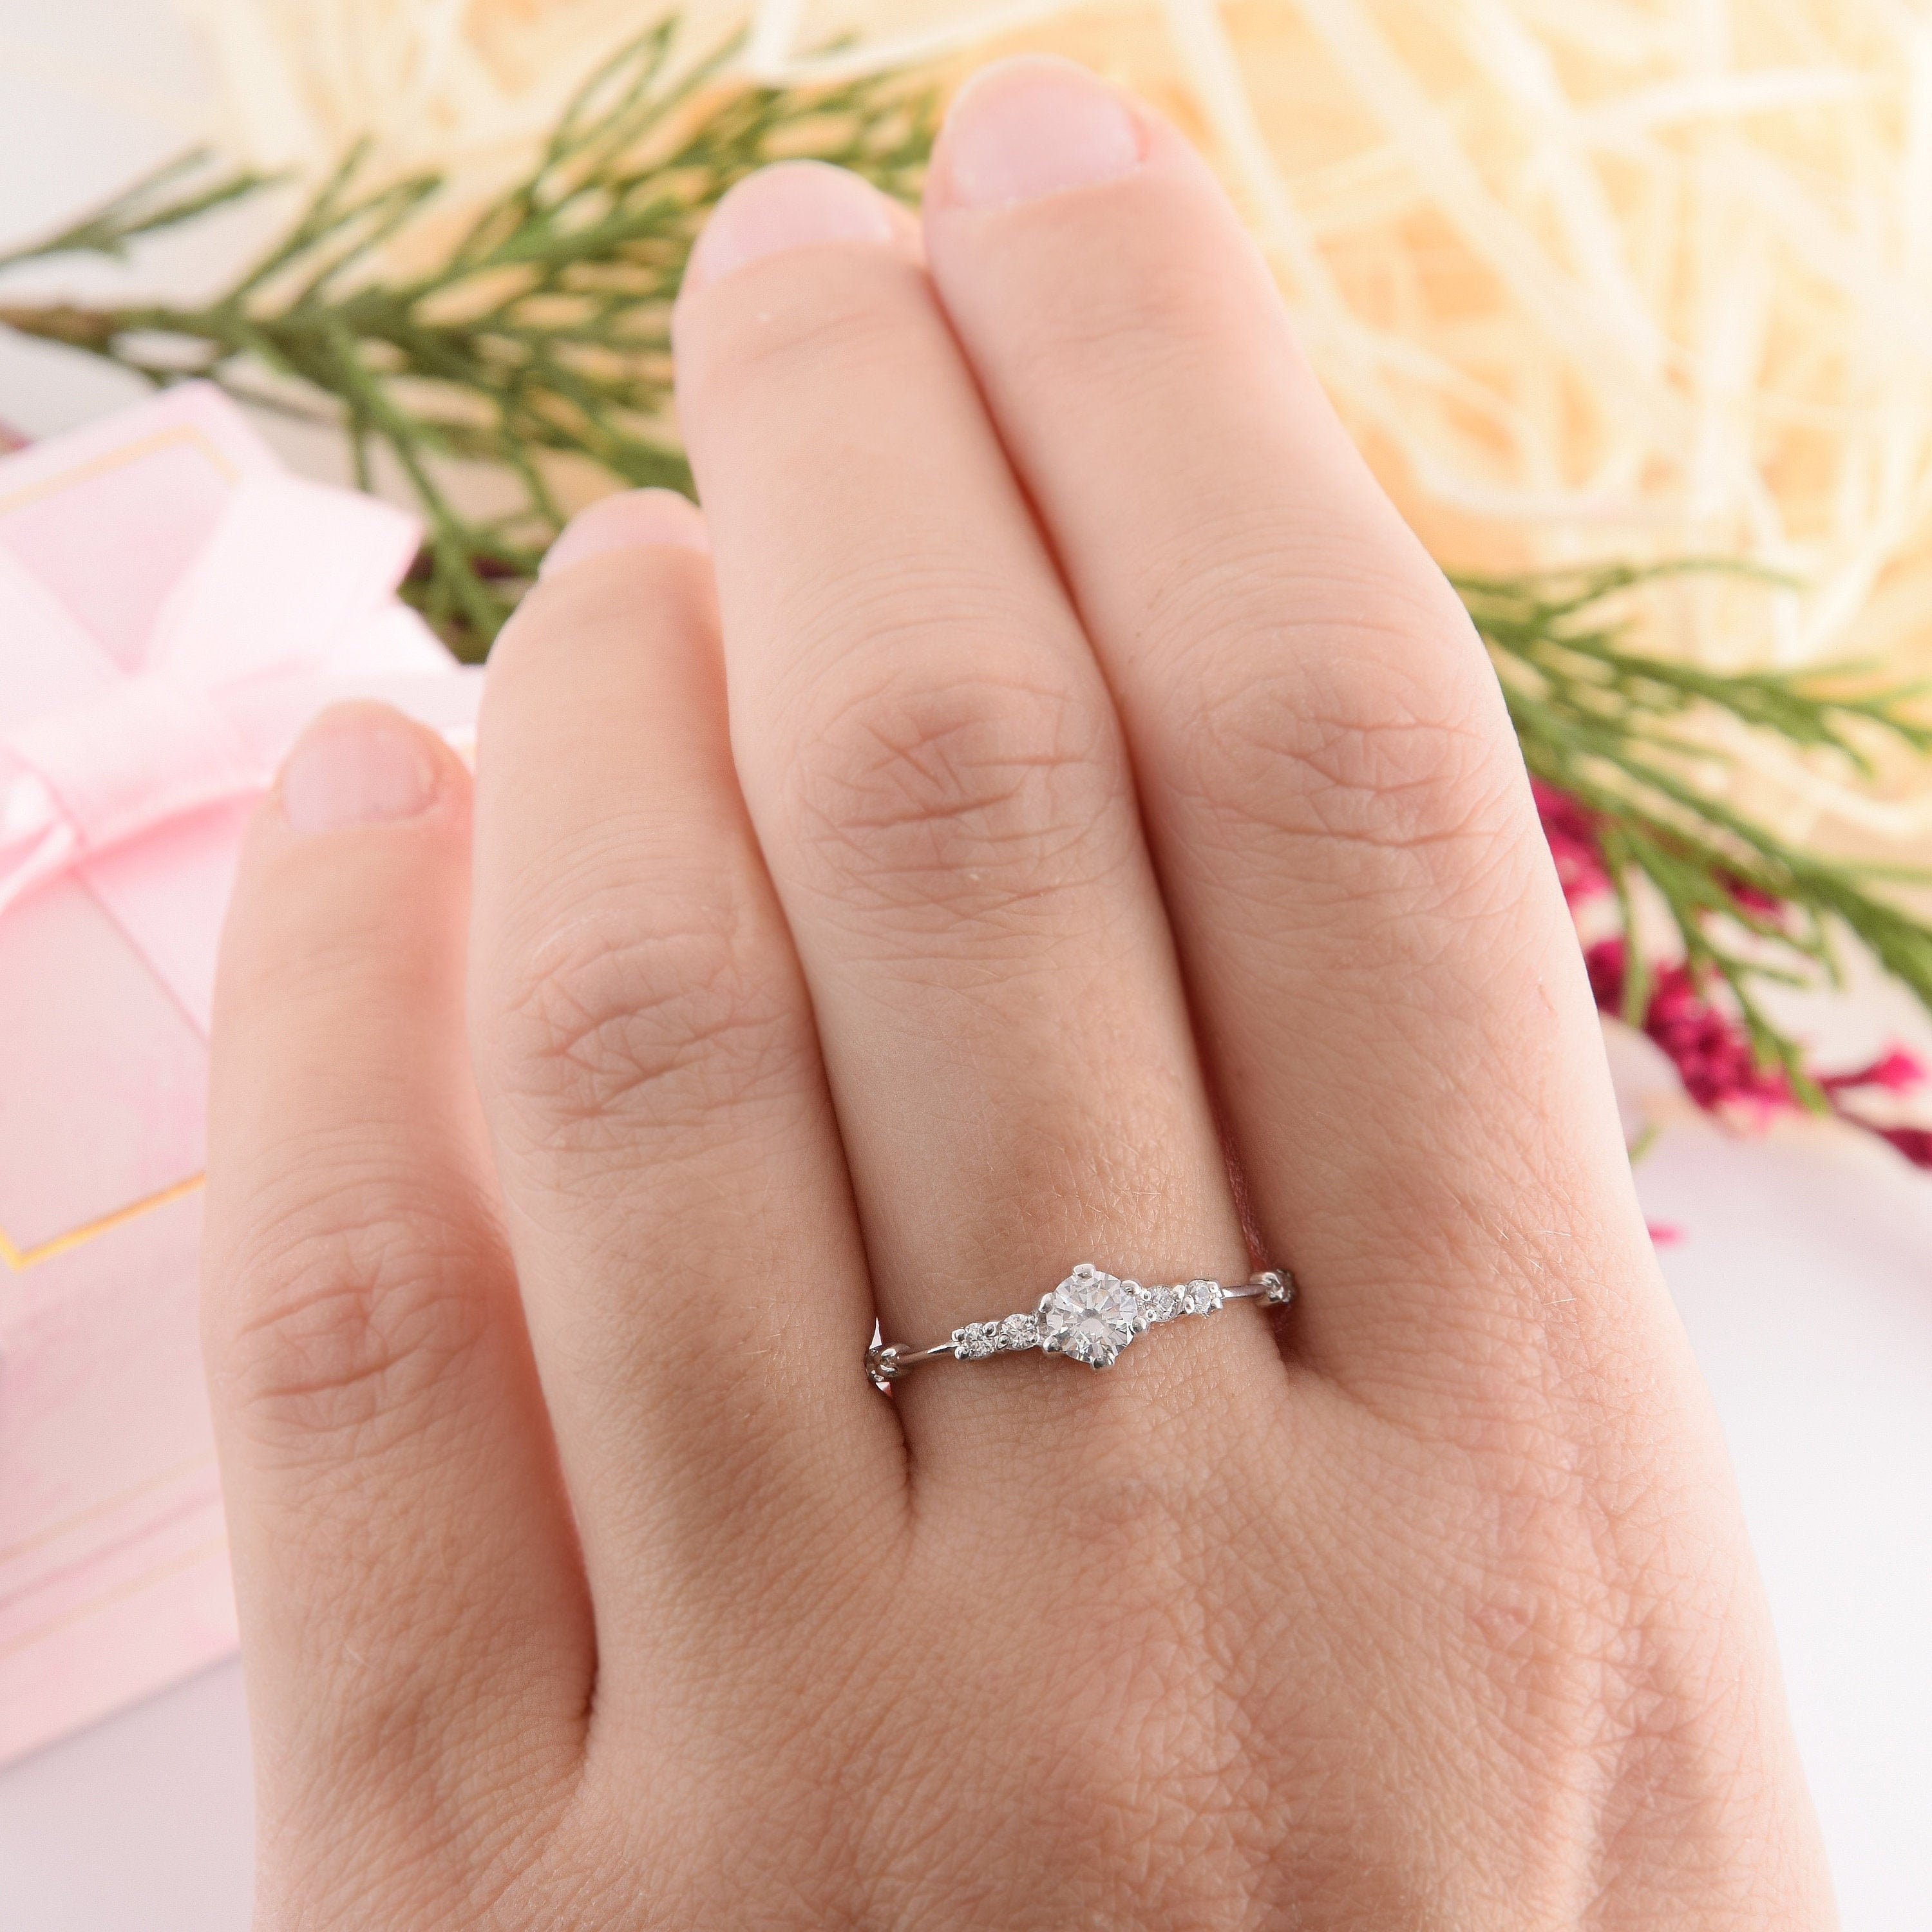 Bridesmaid Ring Promise Ring,CZ Diamond Ring,Gift for Her Statement Diamond Ring Cross Band Diamond Ring Unique Band Silver Diamond Ring